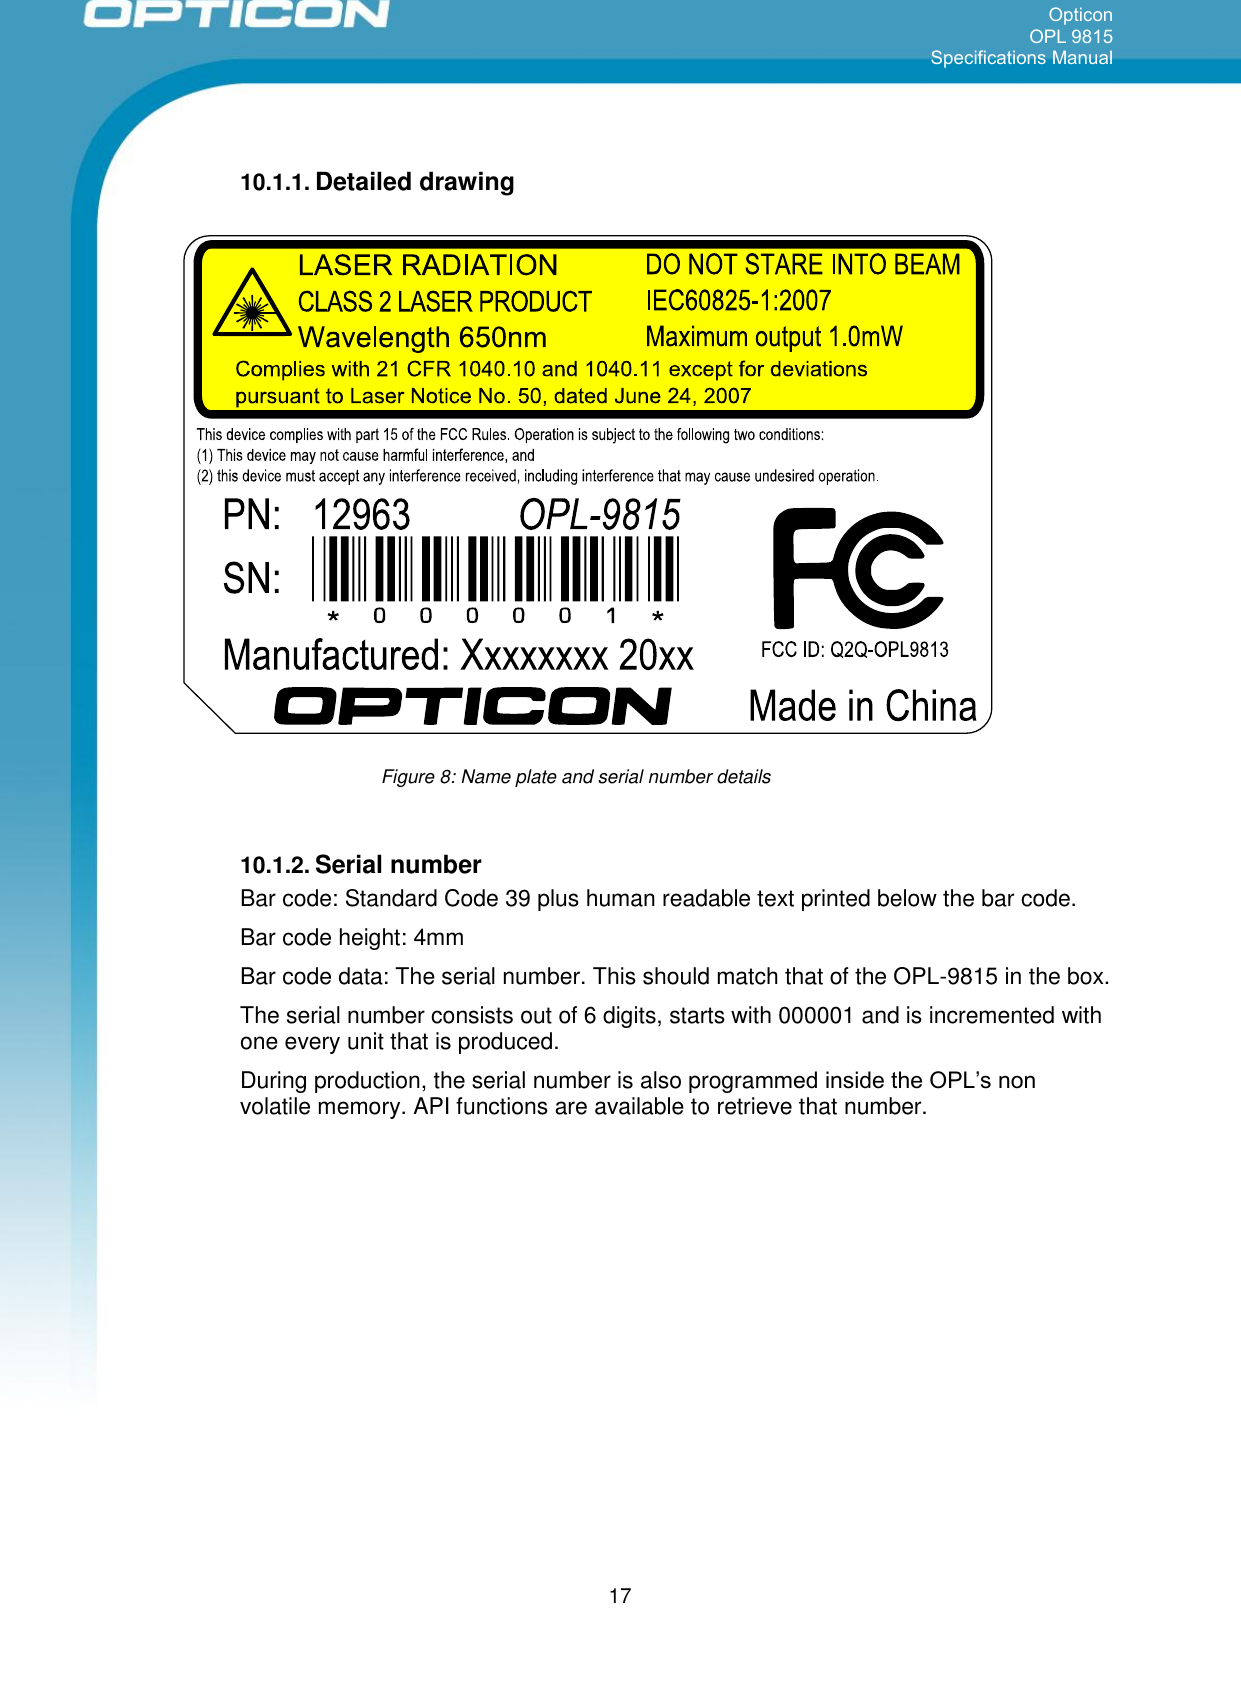 Opticon OPL 9815 Specifications Manual      17 10.1.1. Detailed drawing      10.1.2. Serial number Bar code: Standard Code 39 plus human readable text printed below the bar code. Bar code height: 4mm Bar code data: The serial number. This should match that of the OPL-9815 in the box. The serial number consists out of 6 digits, starts with 000001 and is incremented with one every unit that is produced. During production, the serial number is also programmed inside the OPL’s non volatile memory. API functions are available to retrieve that number.    Figure 8: Name plate and serial number details 